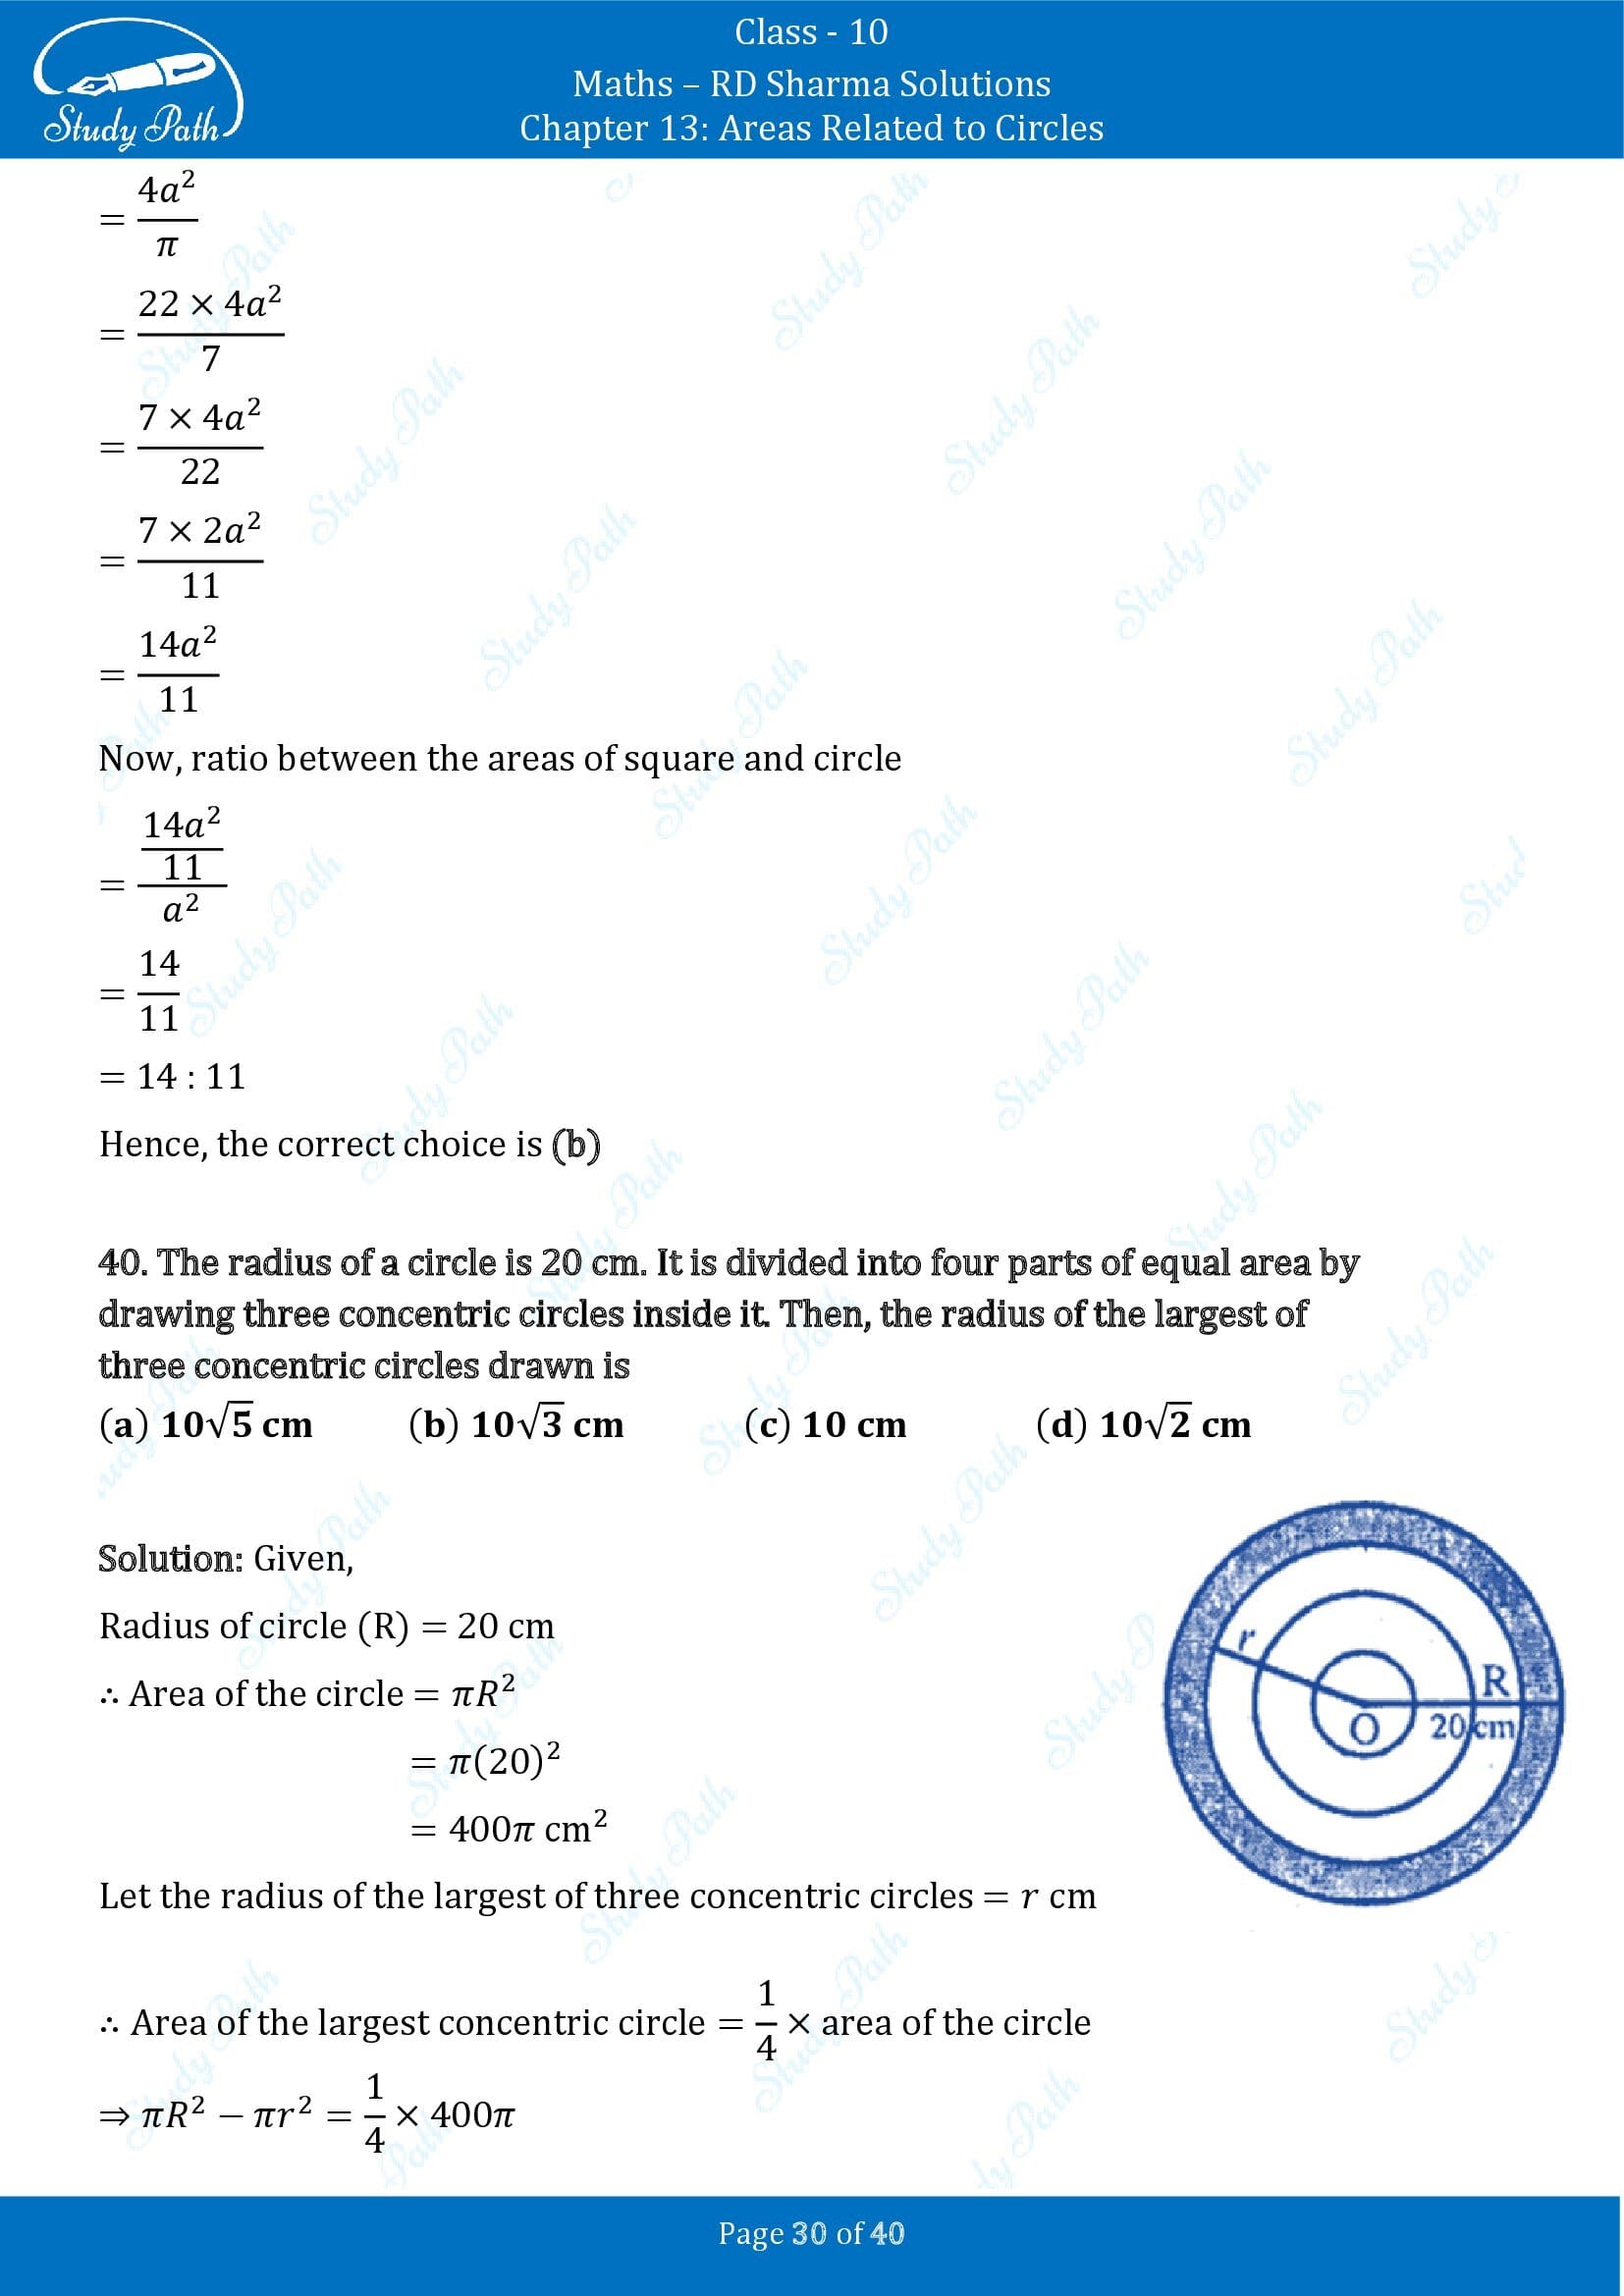 RD Sharma Solutions Class 10 Chapter 13 Areas Related to Circles Multiple Choice Question MCQs 00030